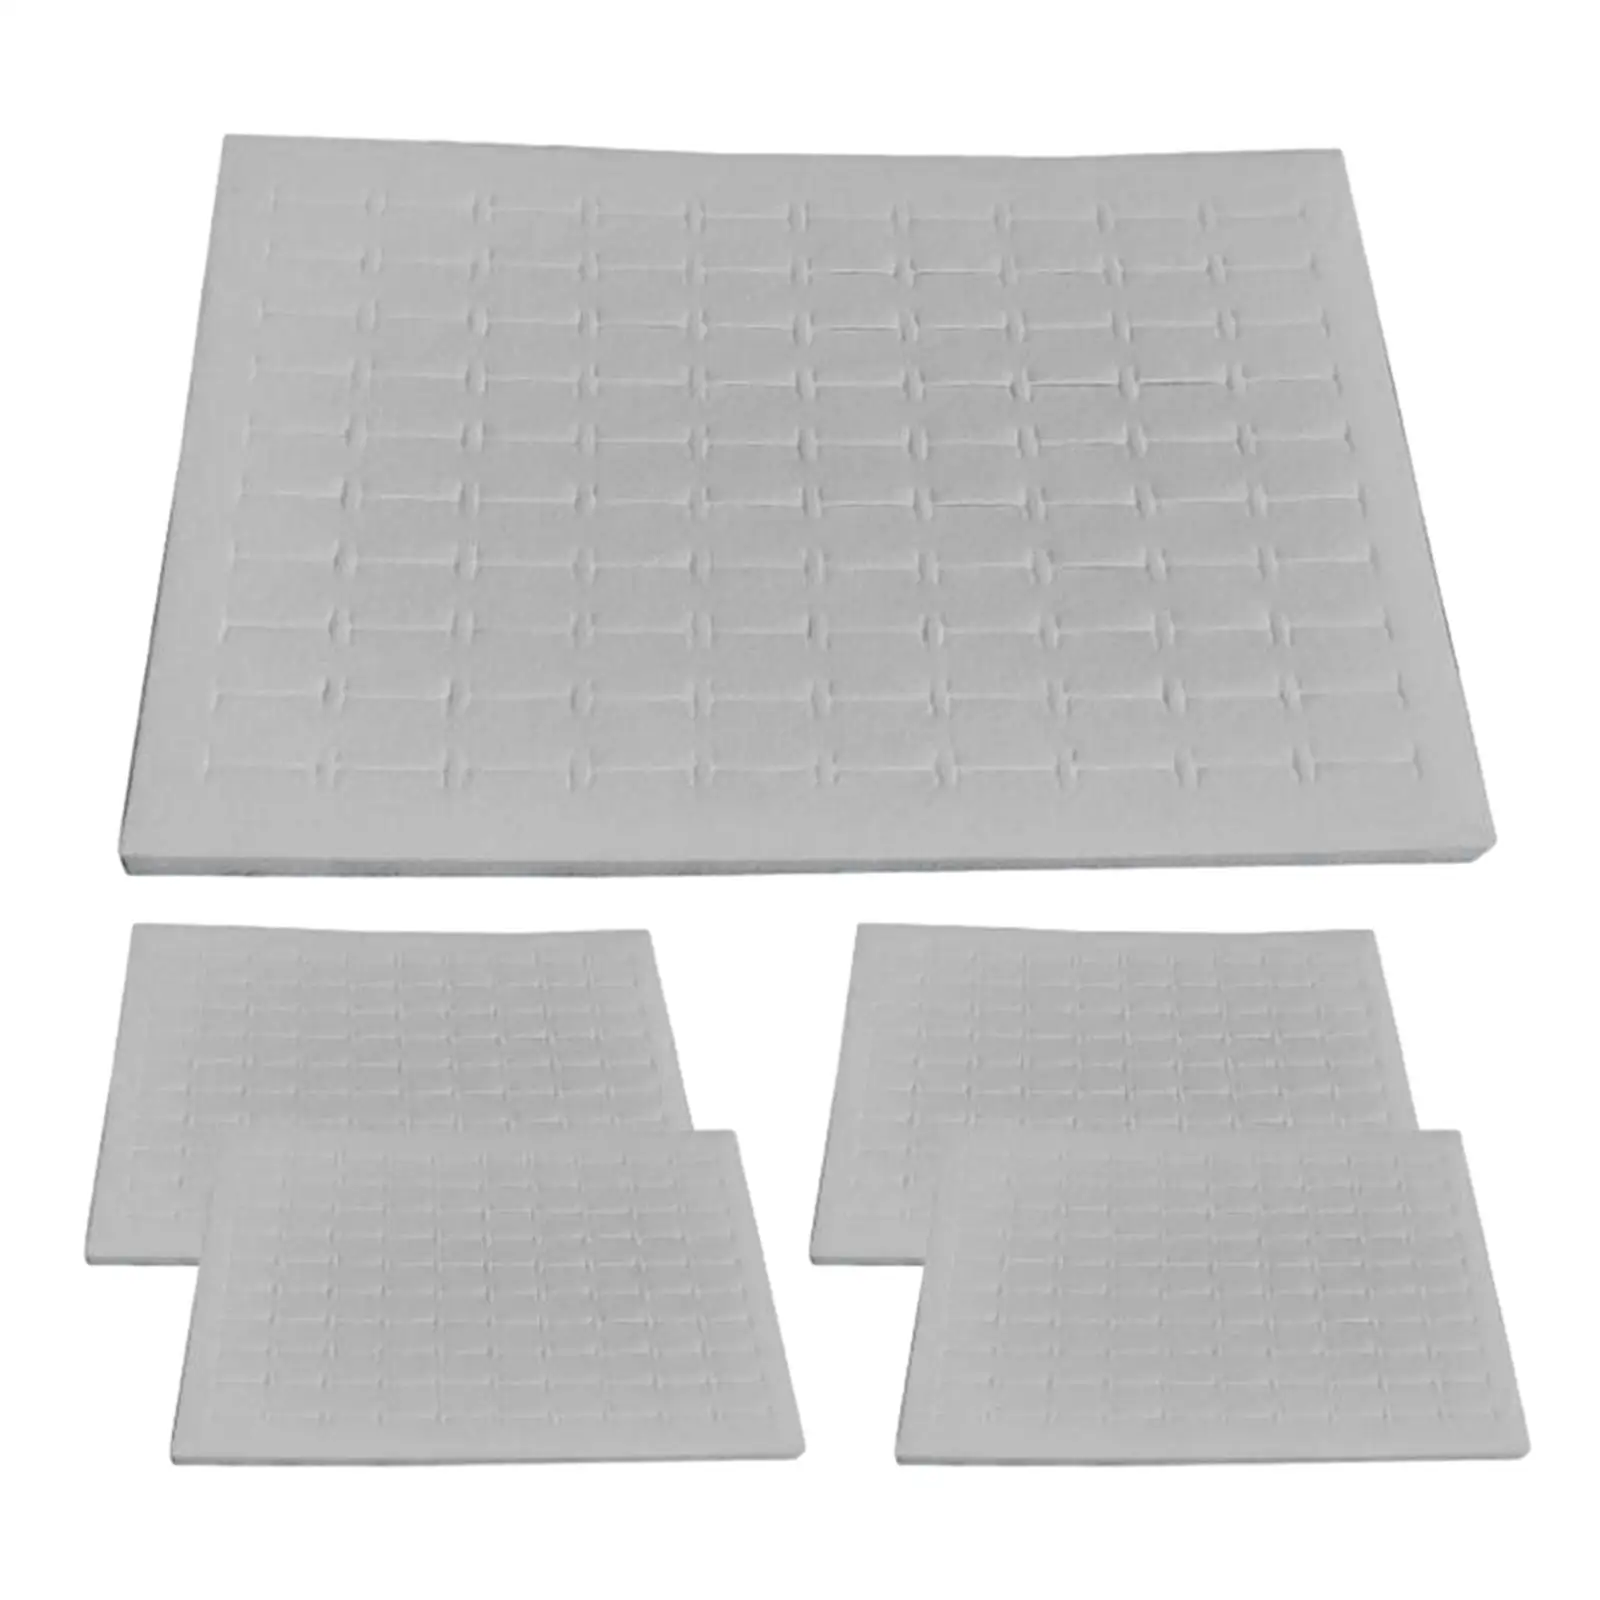 5 Pieces 100 Slots Ring Pad Mats Rings Earring Display Pad for Selling Rings